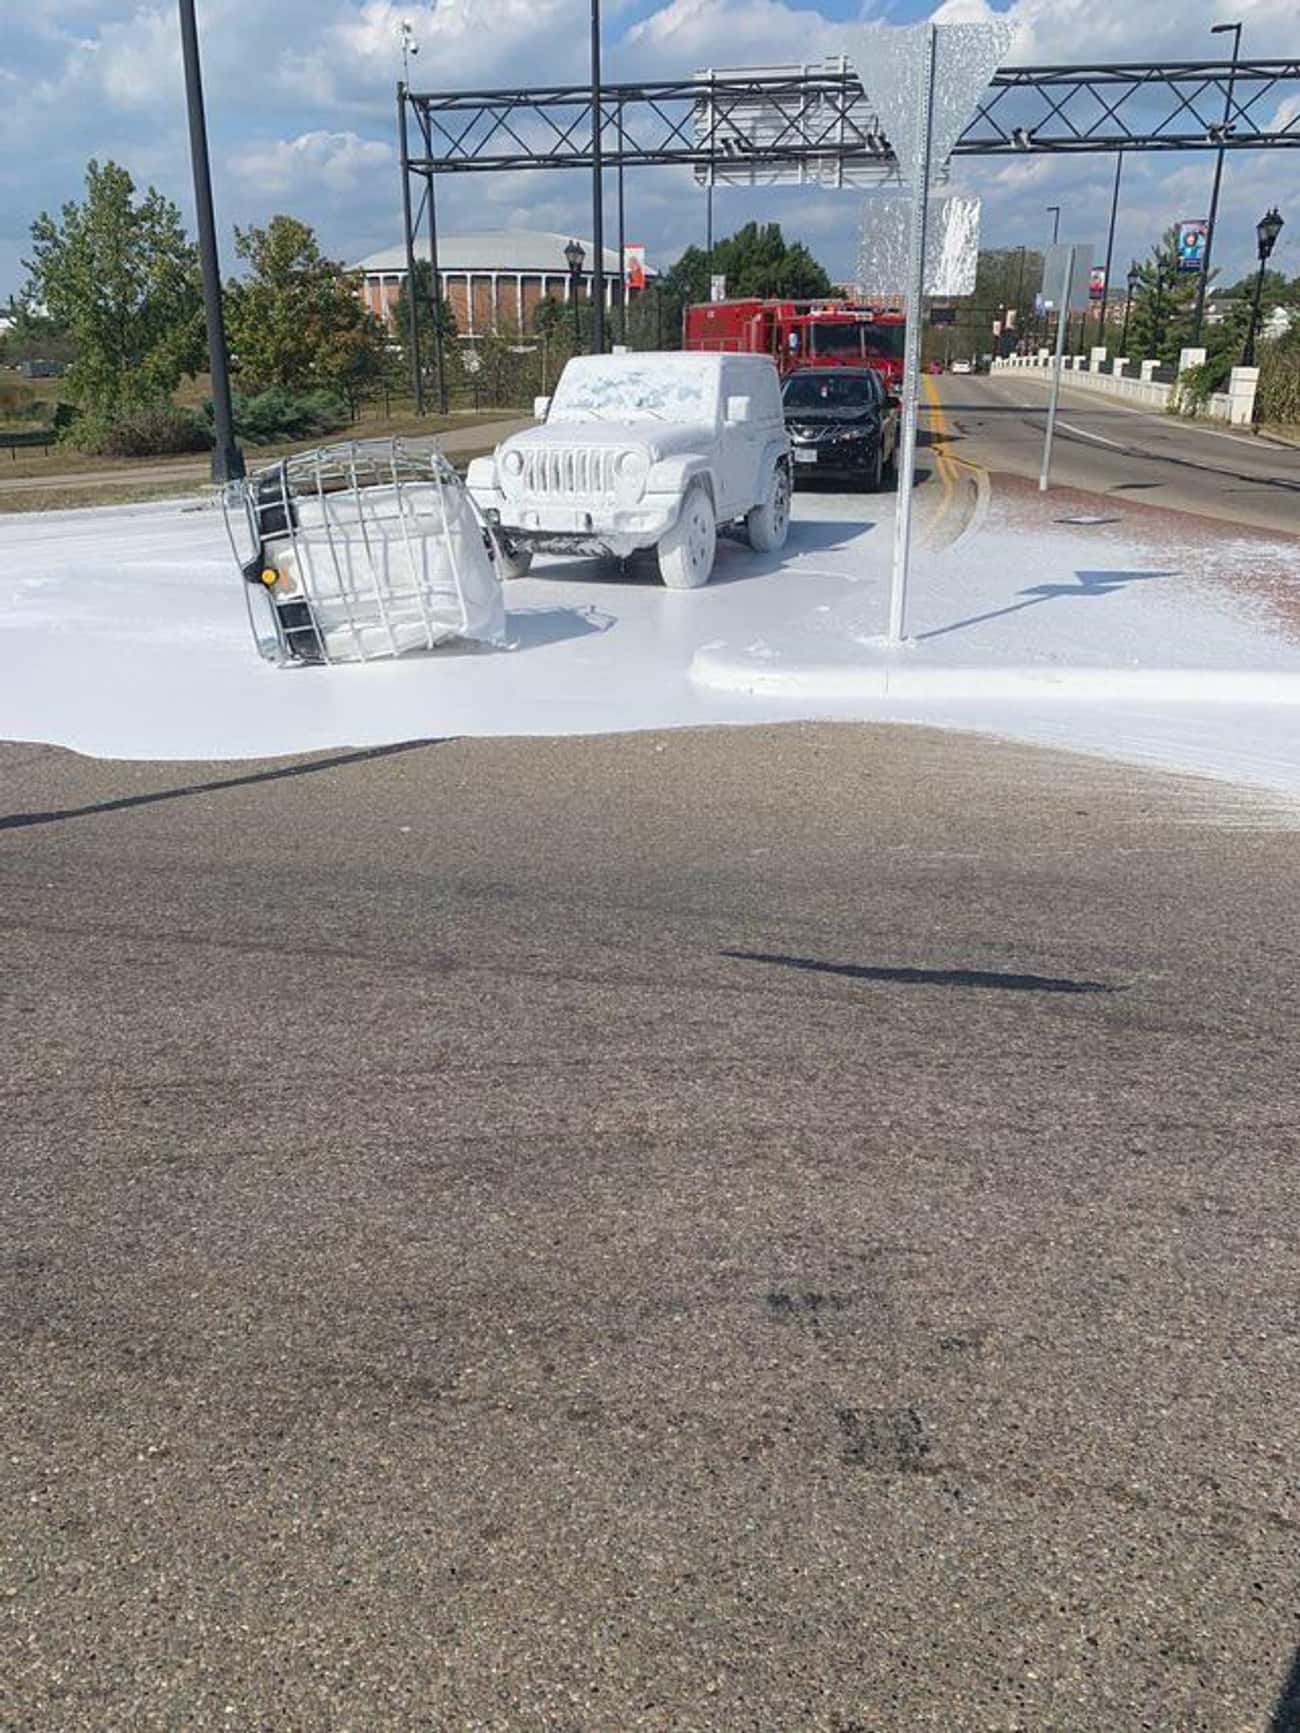 "Truck Carrying White Paint Dropped It On The Road"